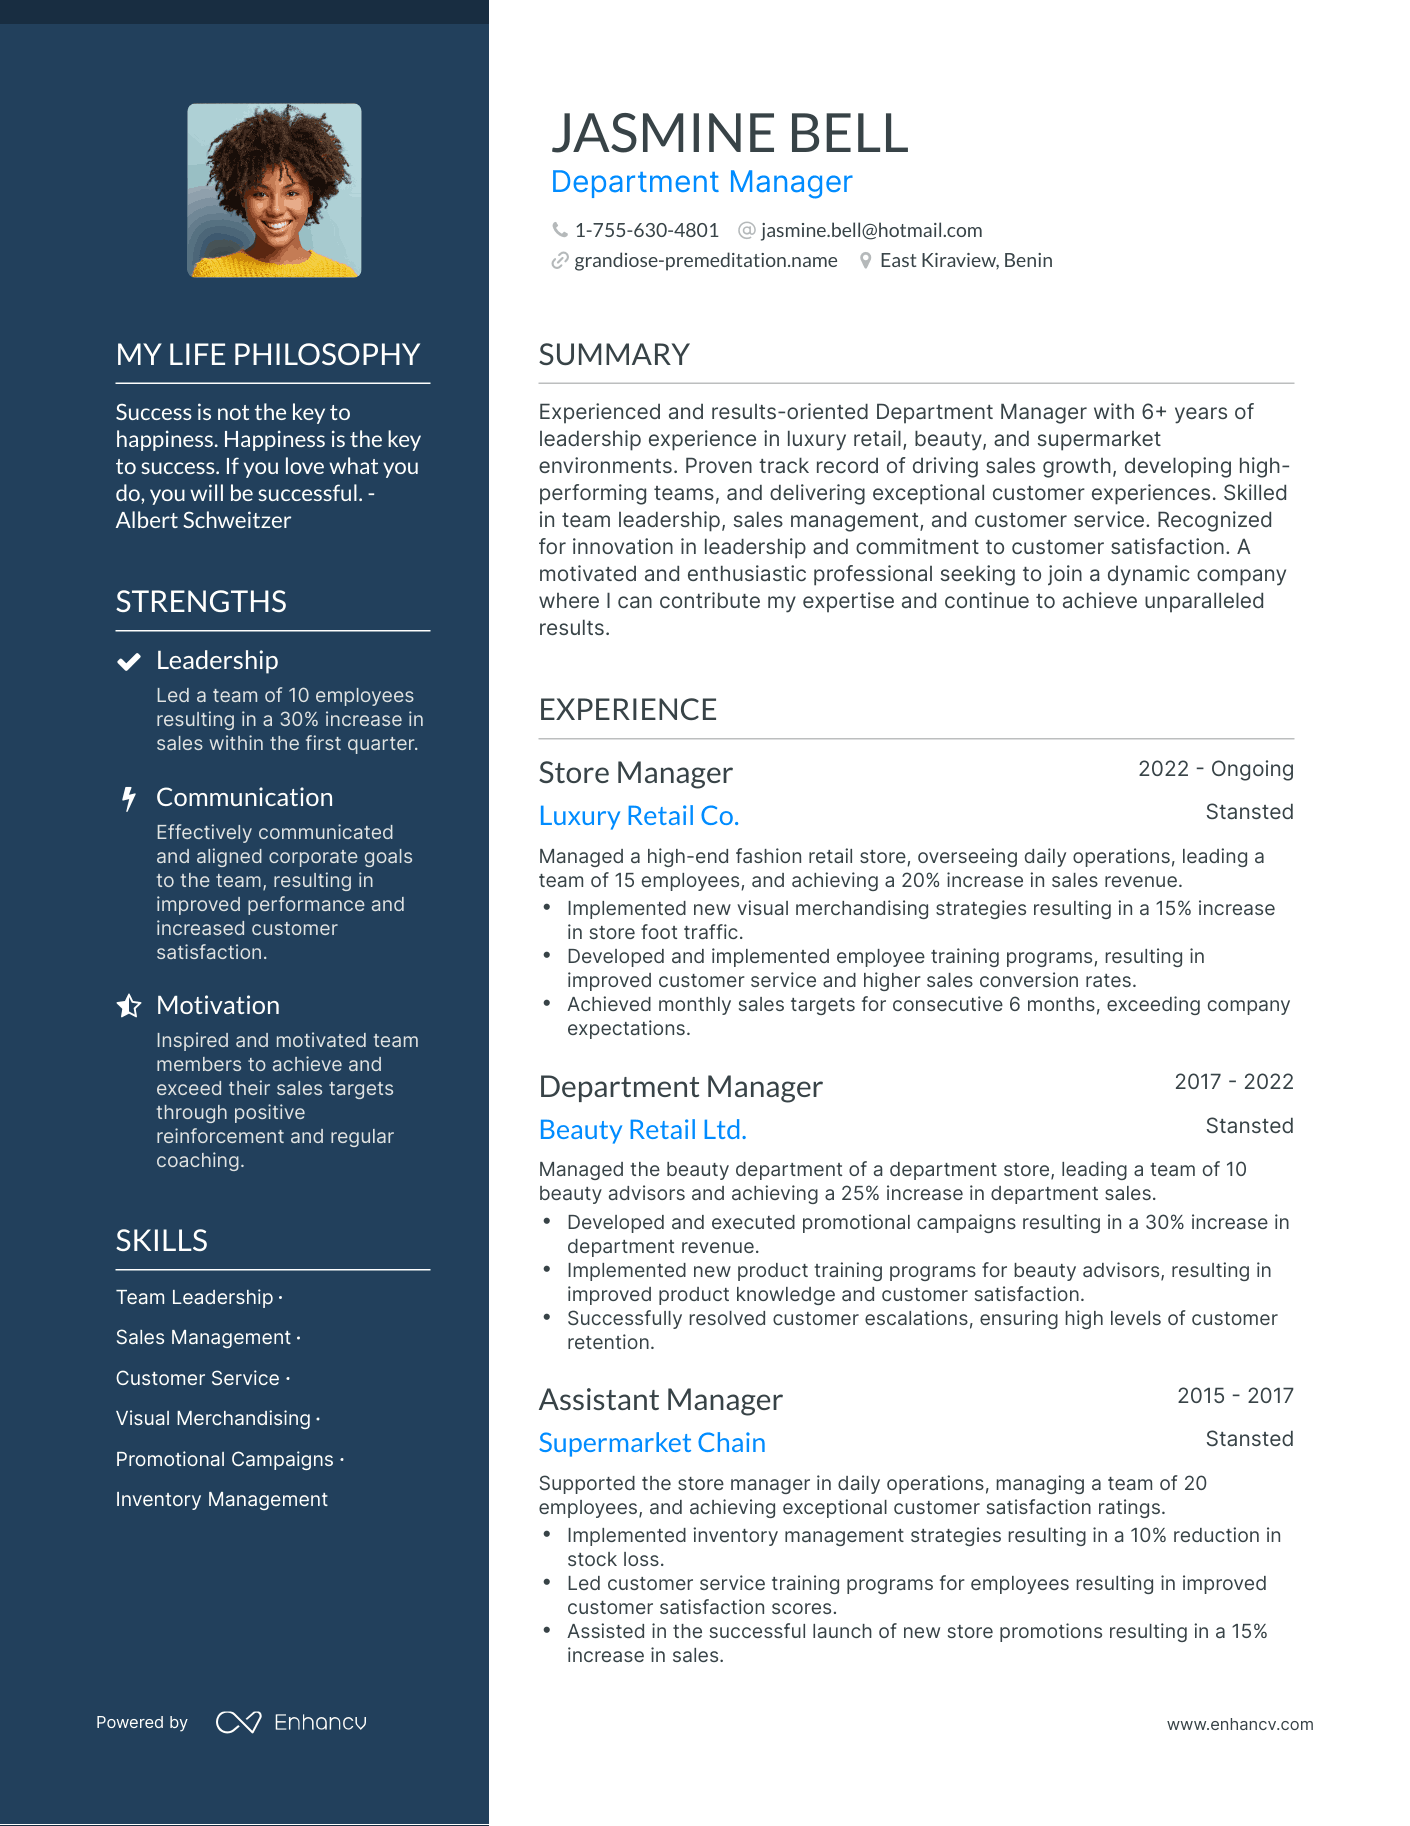 Department Manager resume example